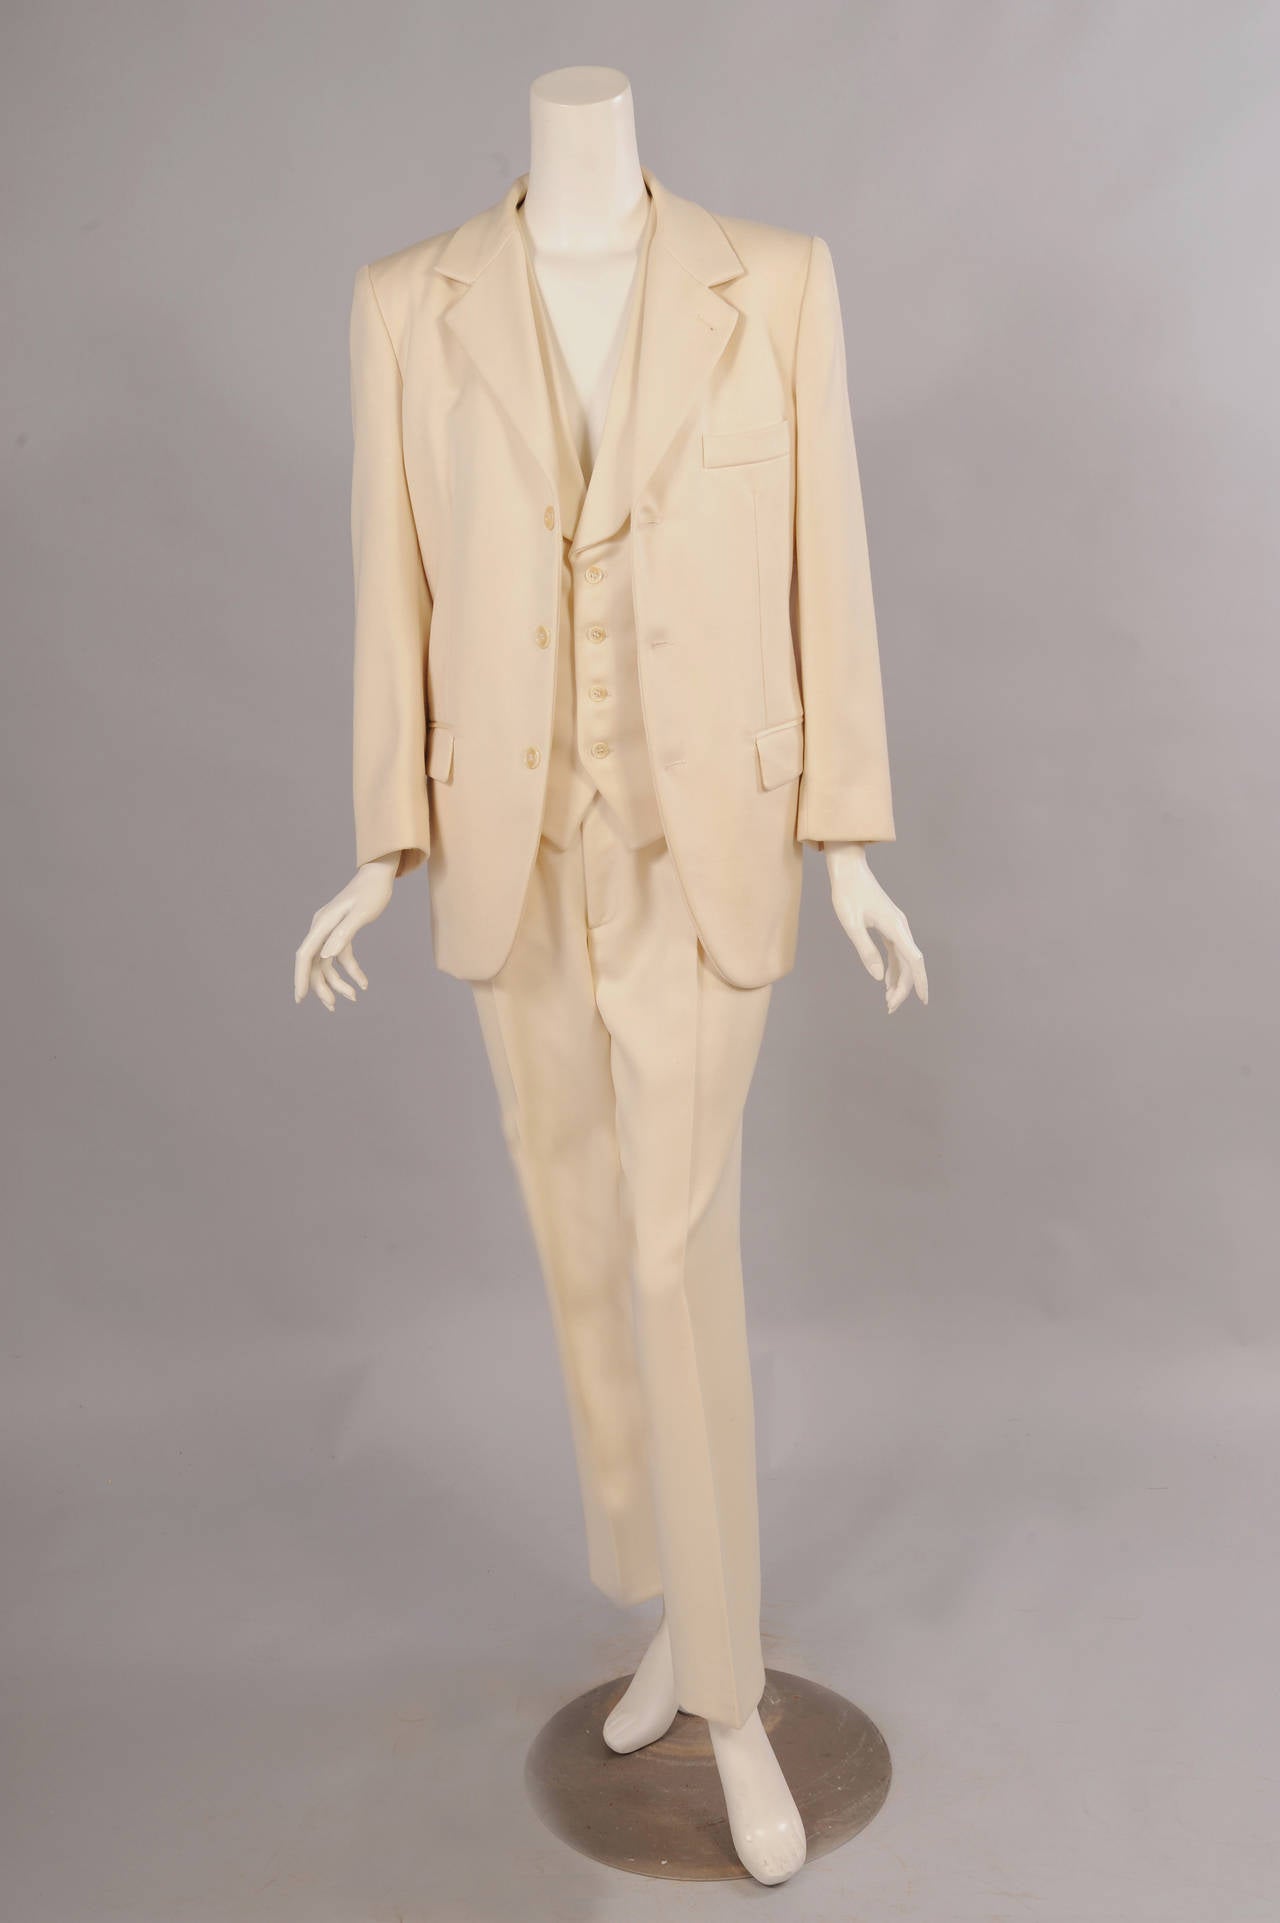 A gorgeous cream wool suit that is tailored for a man but would look equally chic on a woman was worn n the runway. The three button jacket has notched lapels, a breast pocket and two hip pockets. There are four interior pockets as well. The vest